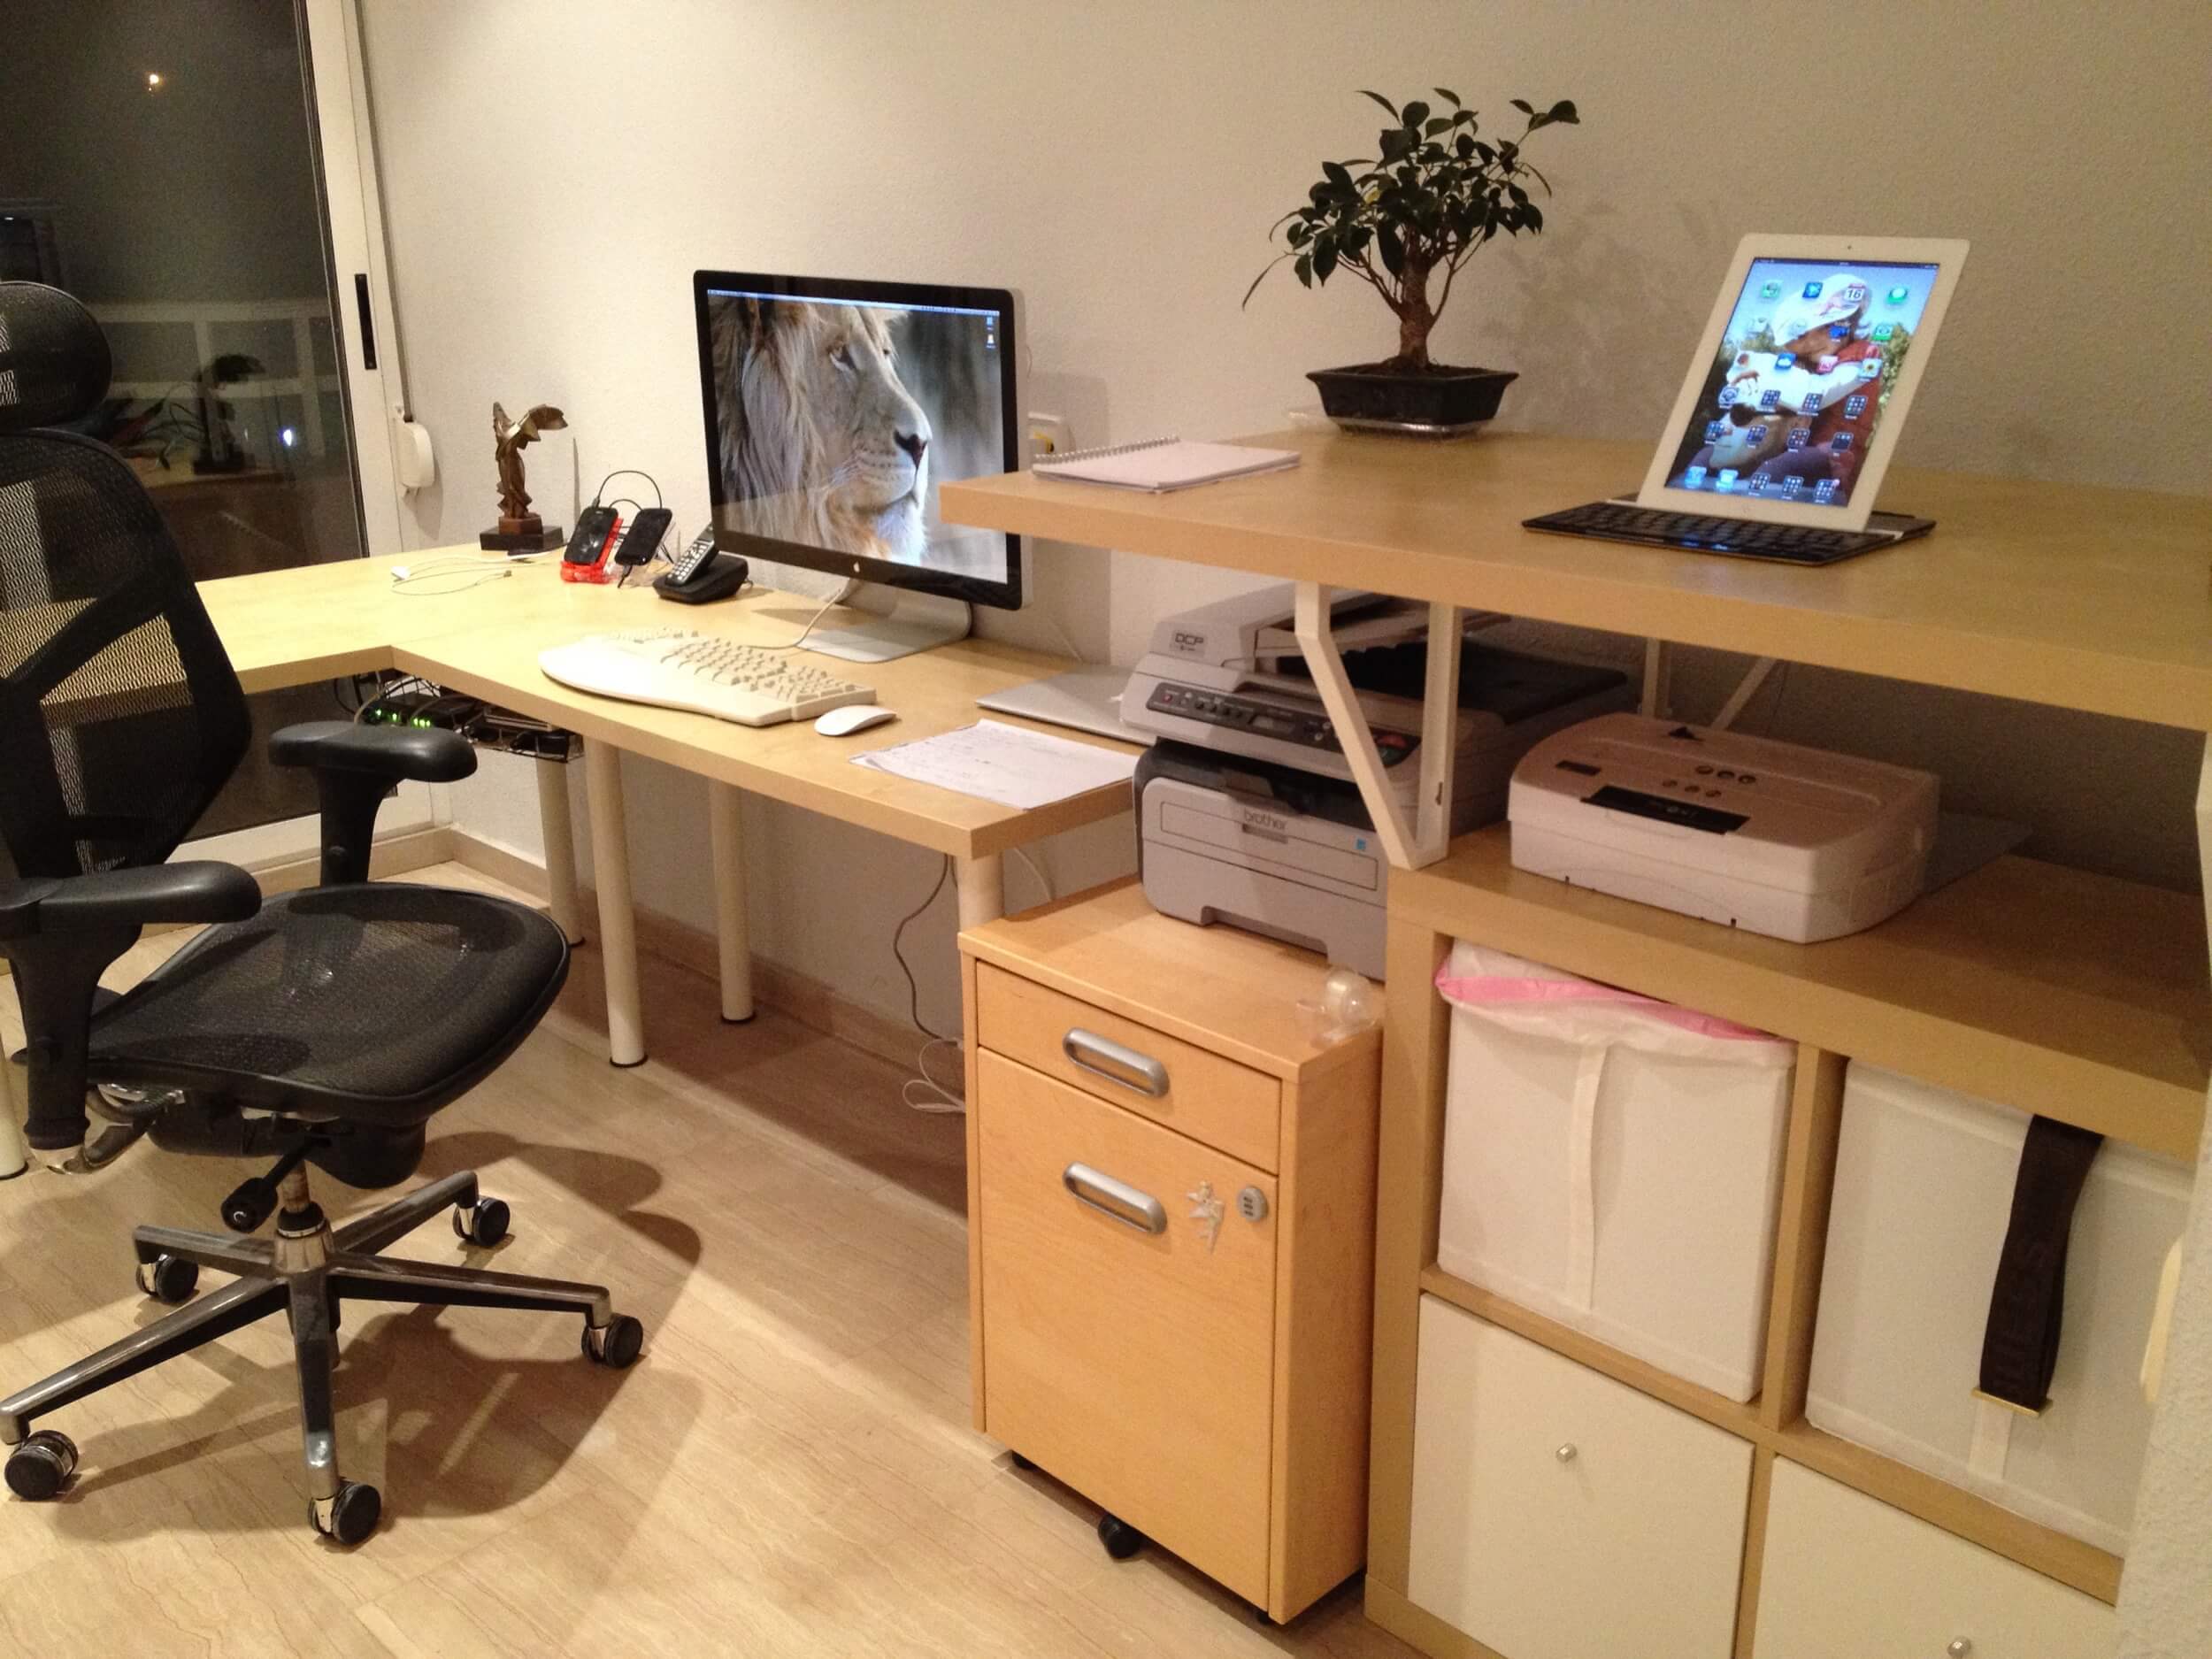 Simplifying Productive! Home Office in 2012